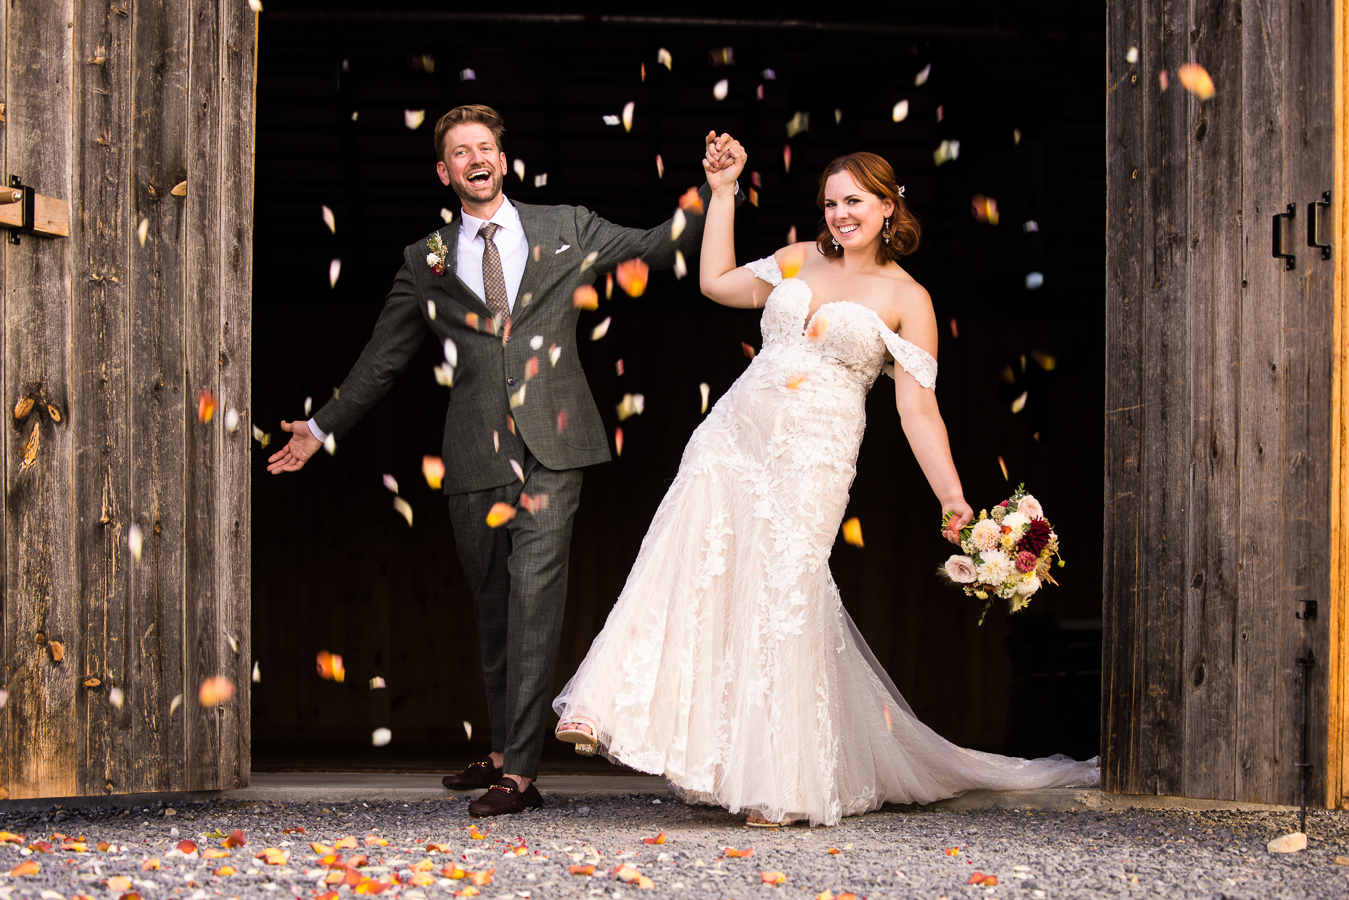 fun, colorful, vibrant image of the bride and groom as they exit the barn doors as colorful petals fall around them provided by iron willow floral designs for this branding photography session 